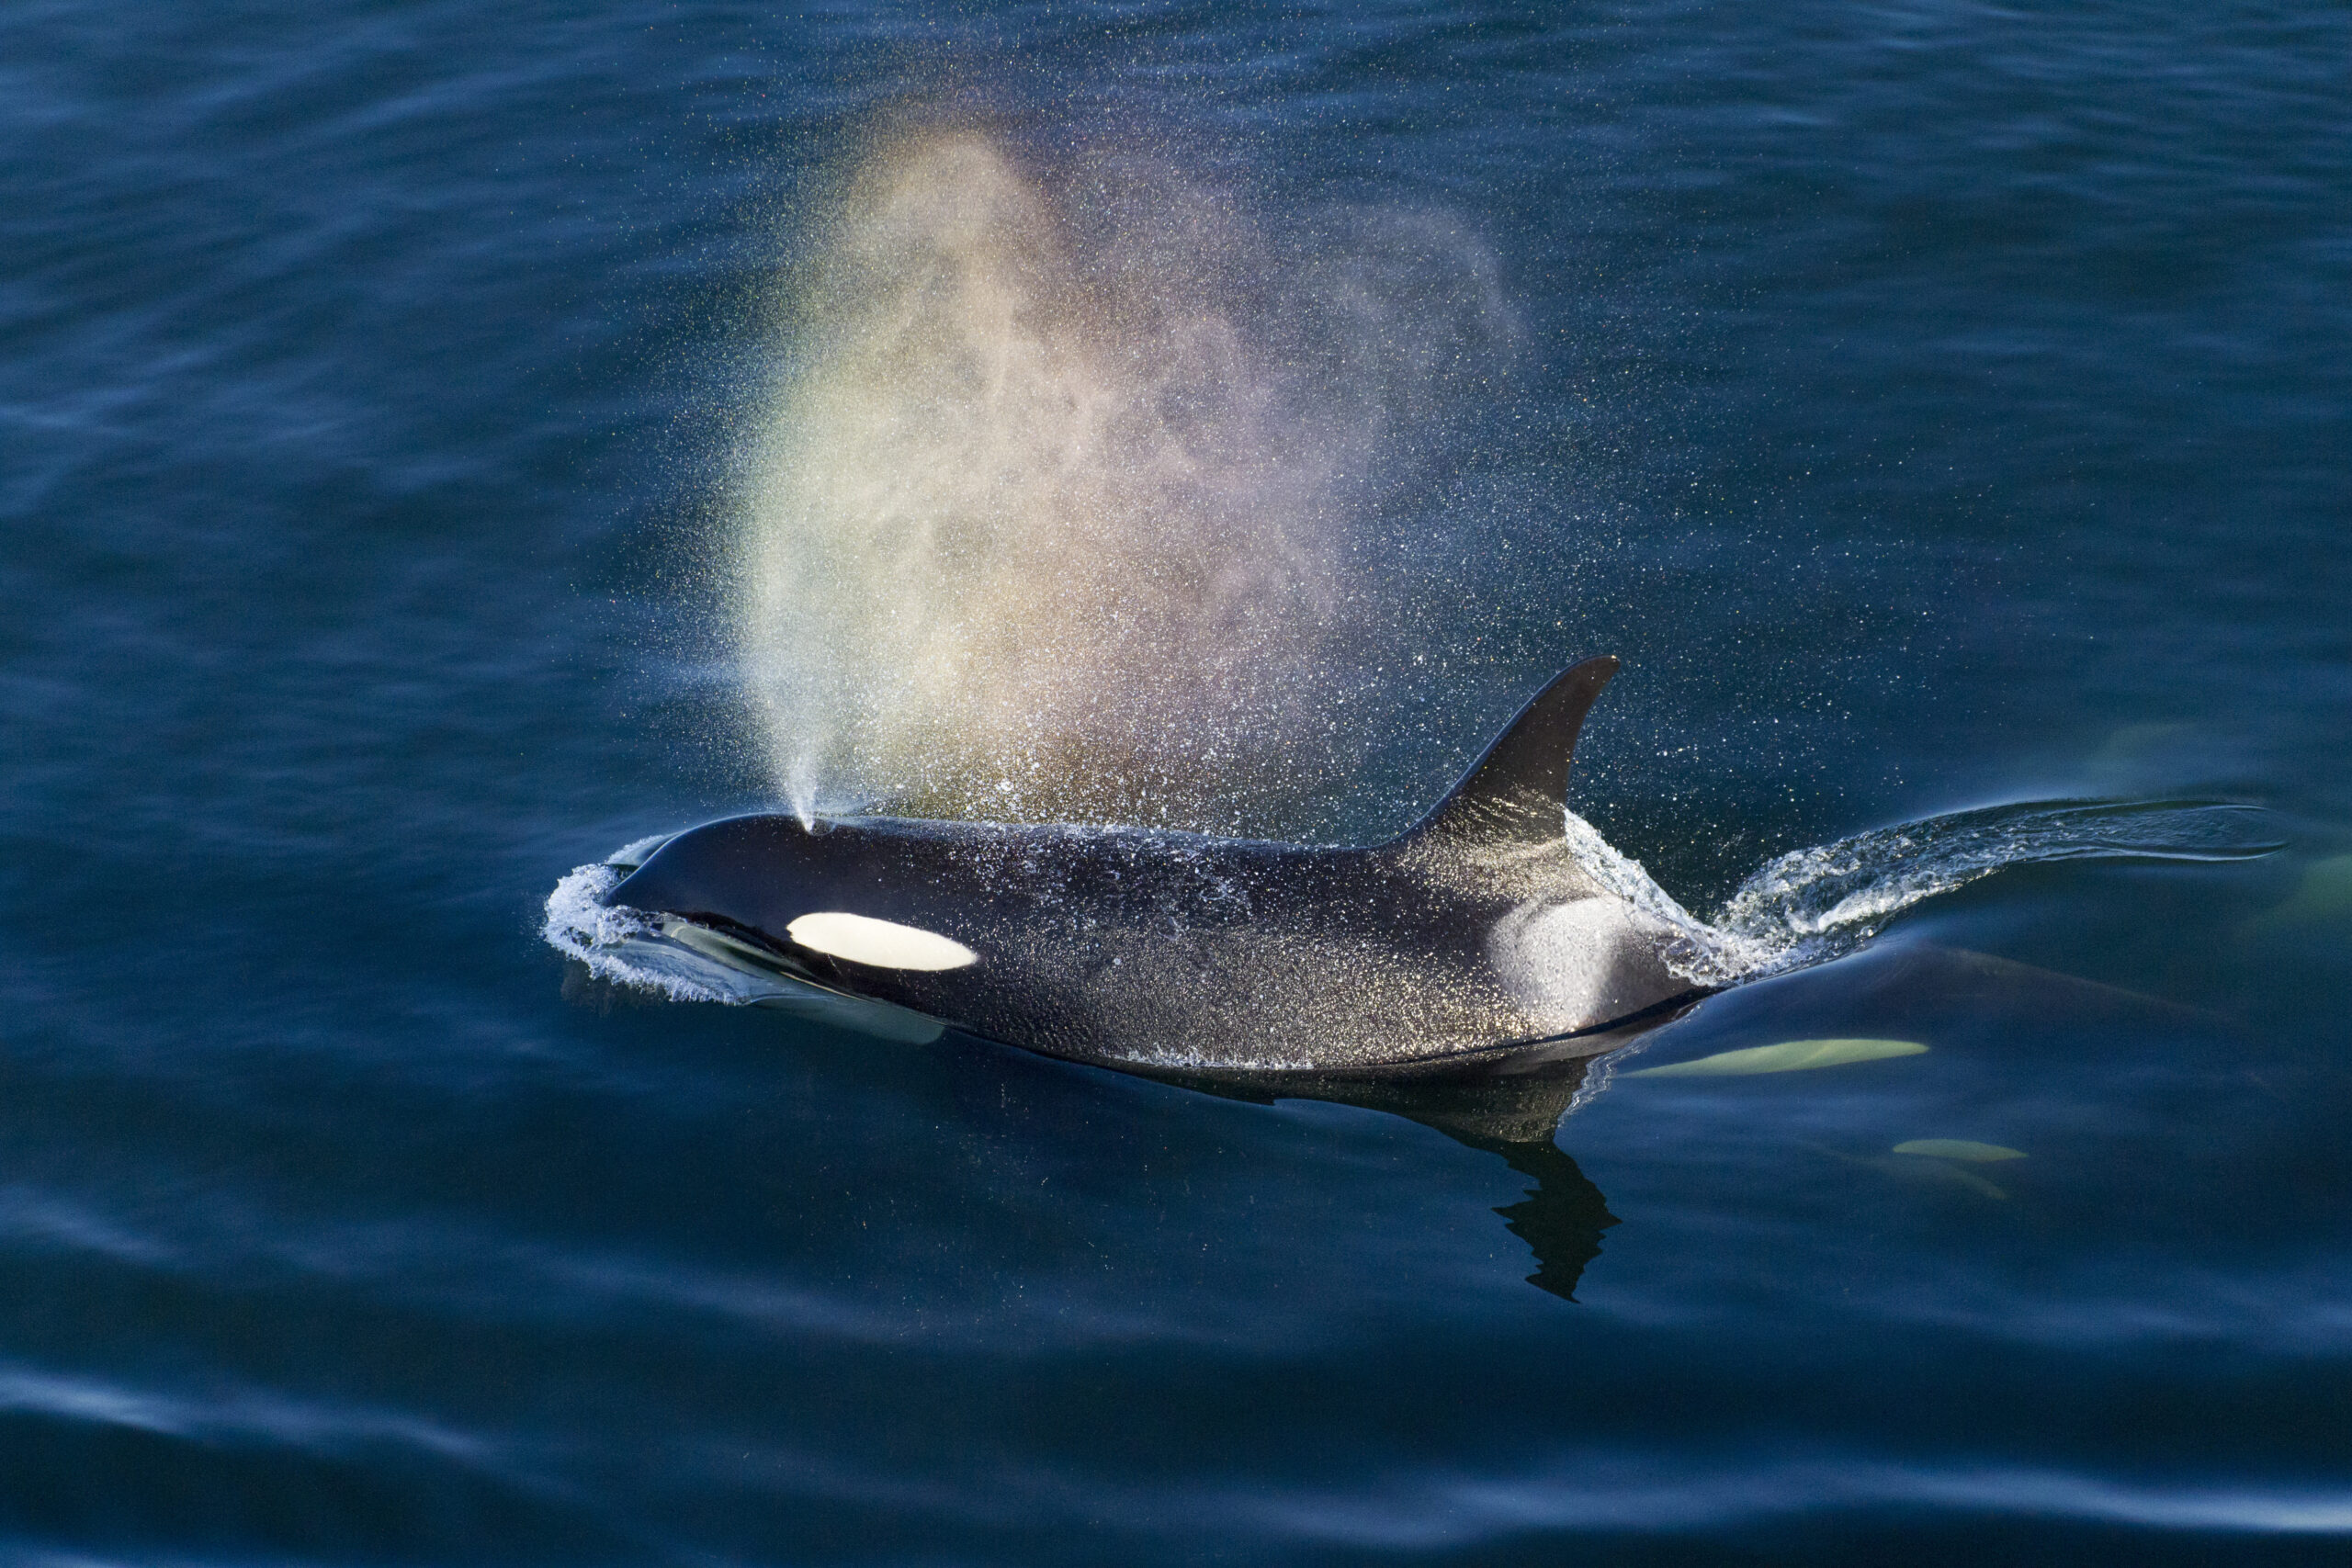 J16, a southern resident orca, making rainbows while surfacing